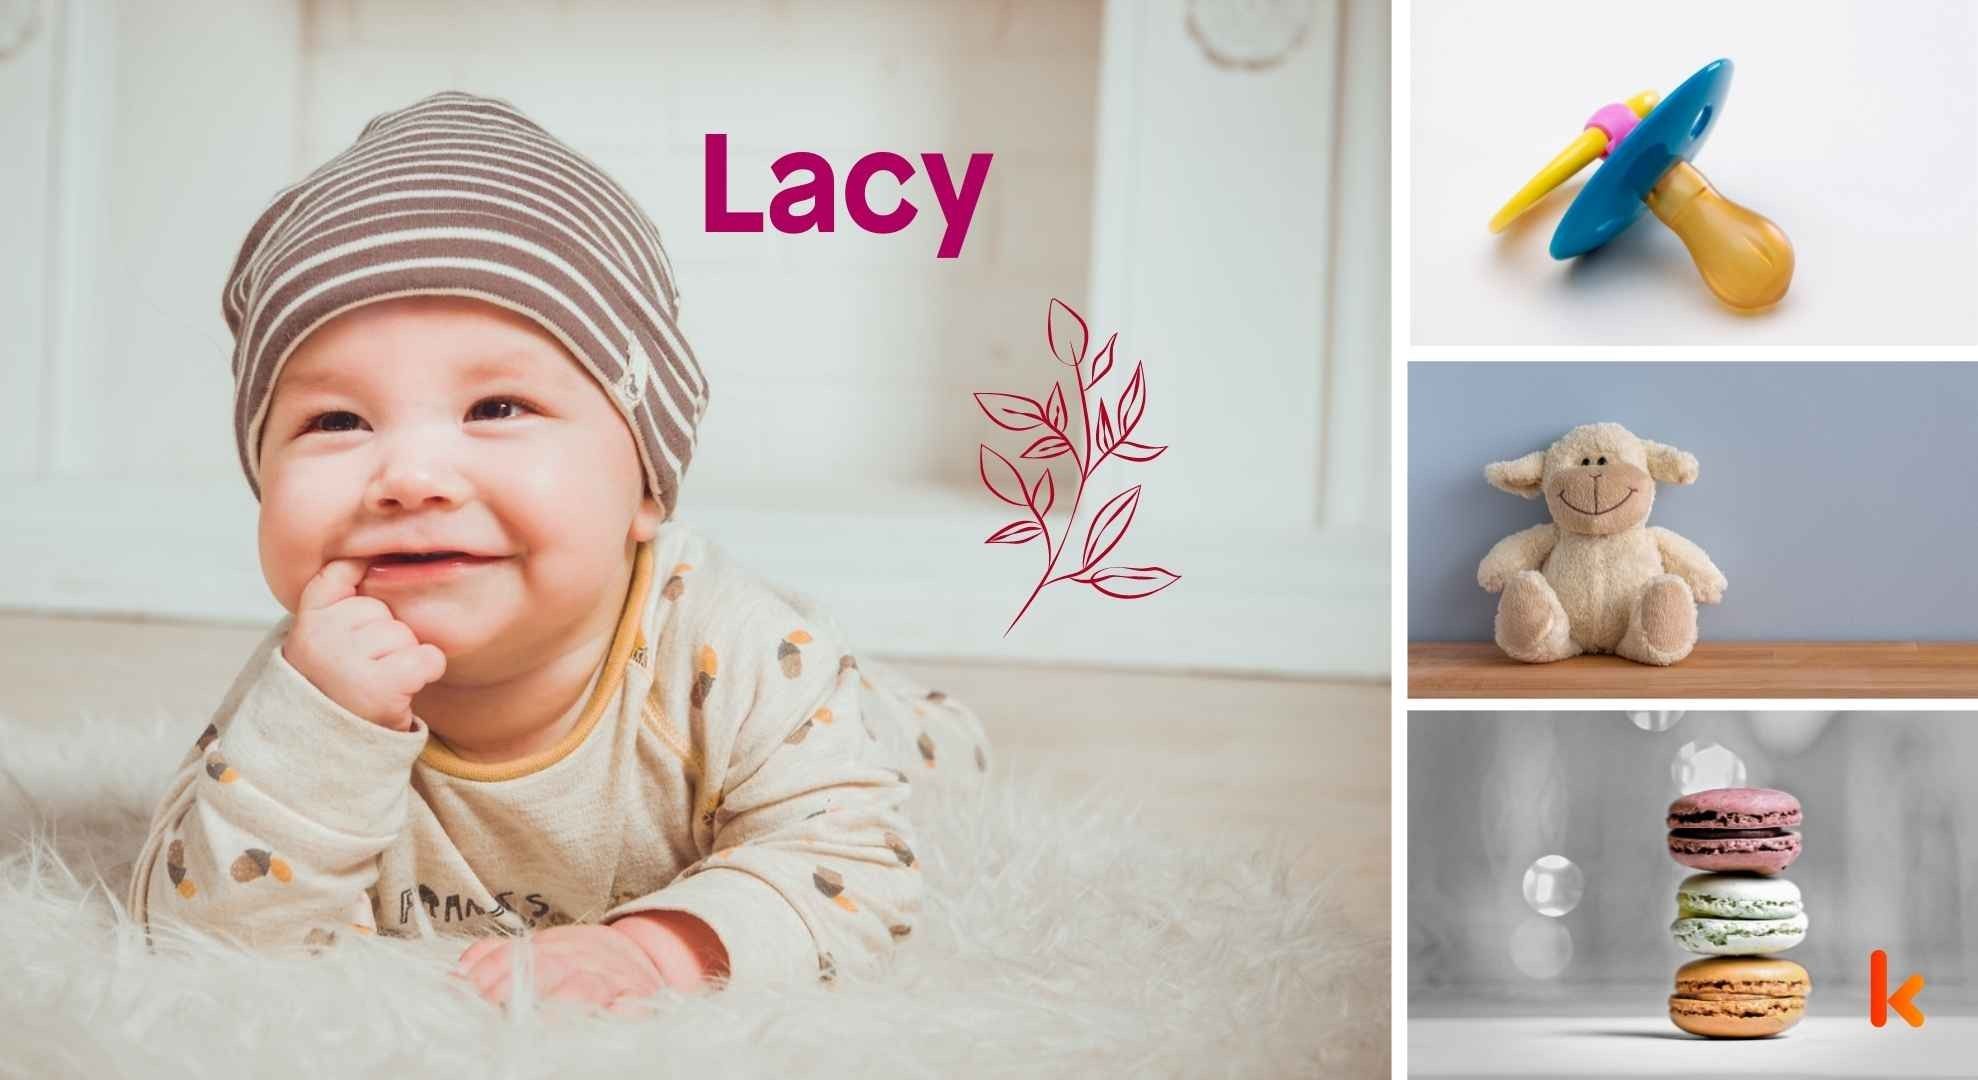 Meaning of the name Lacy